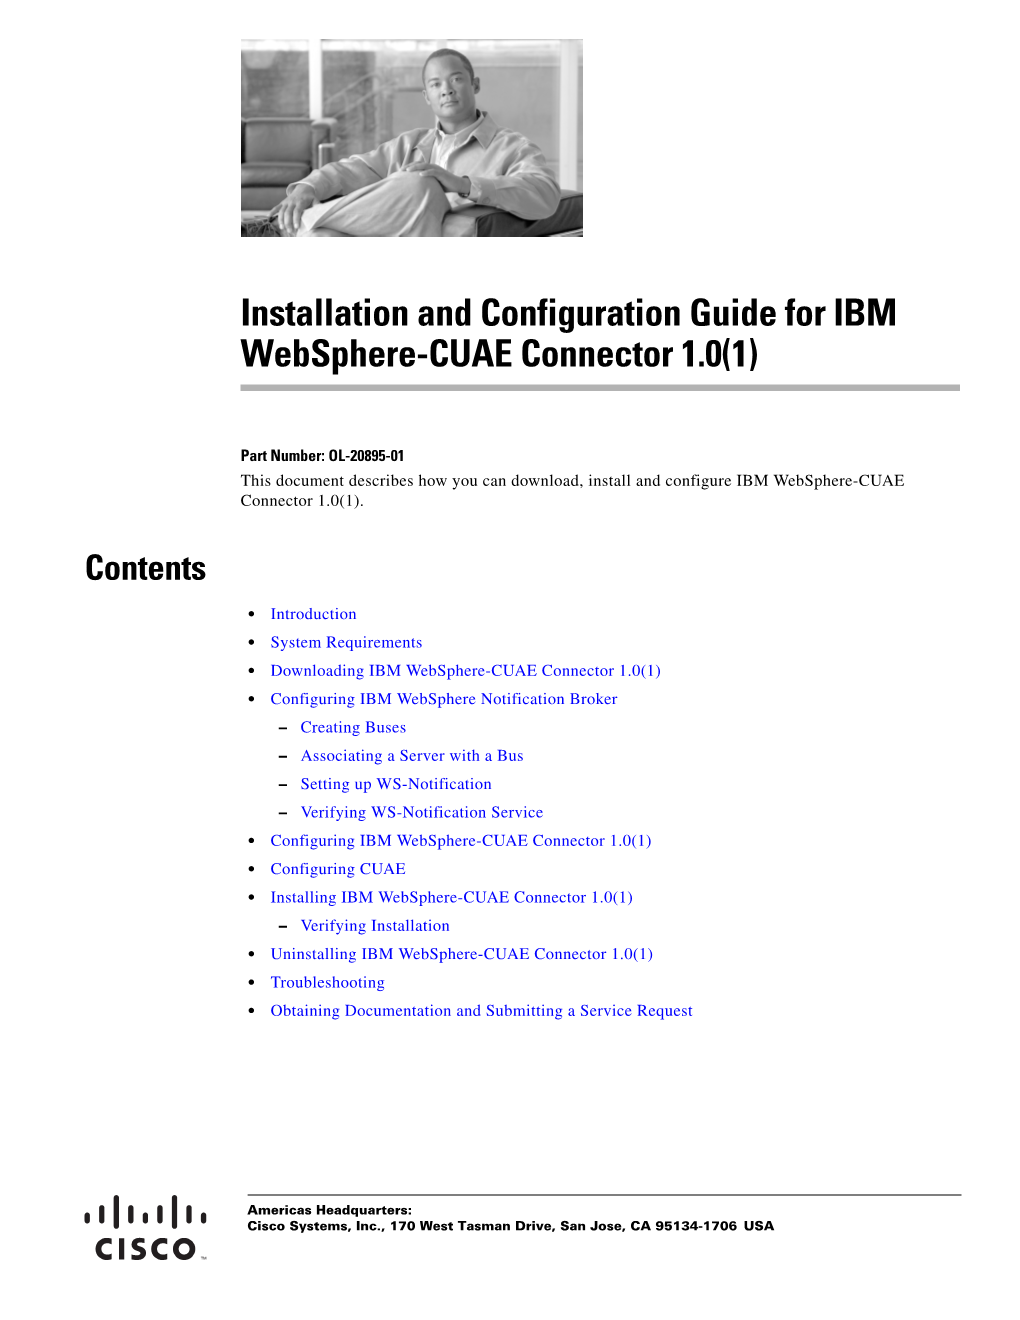 Installation and Configuration Guide for IBM Websphere-CUAE Connector 1.0(1)